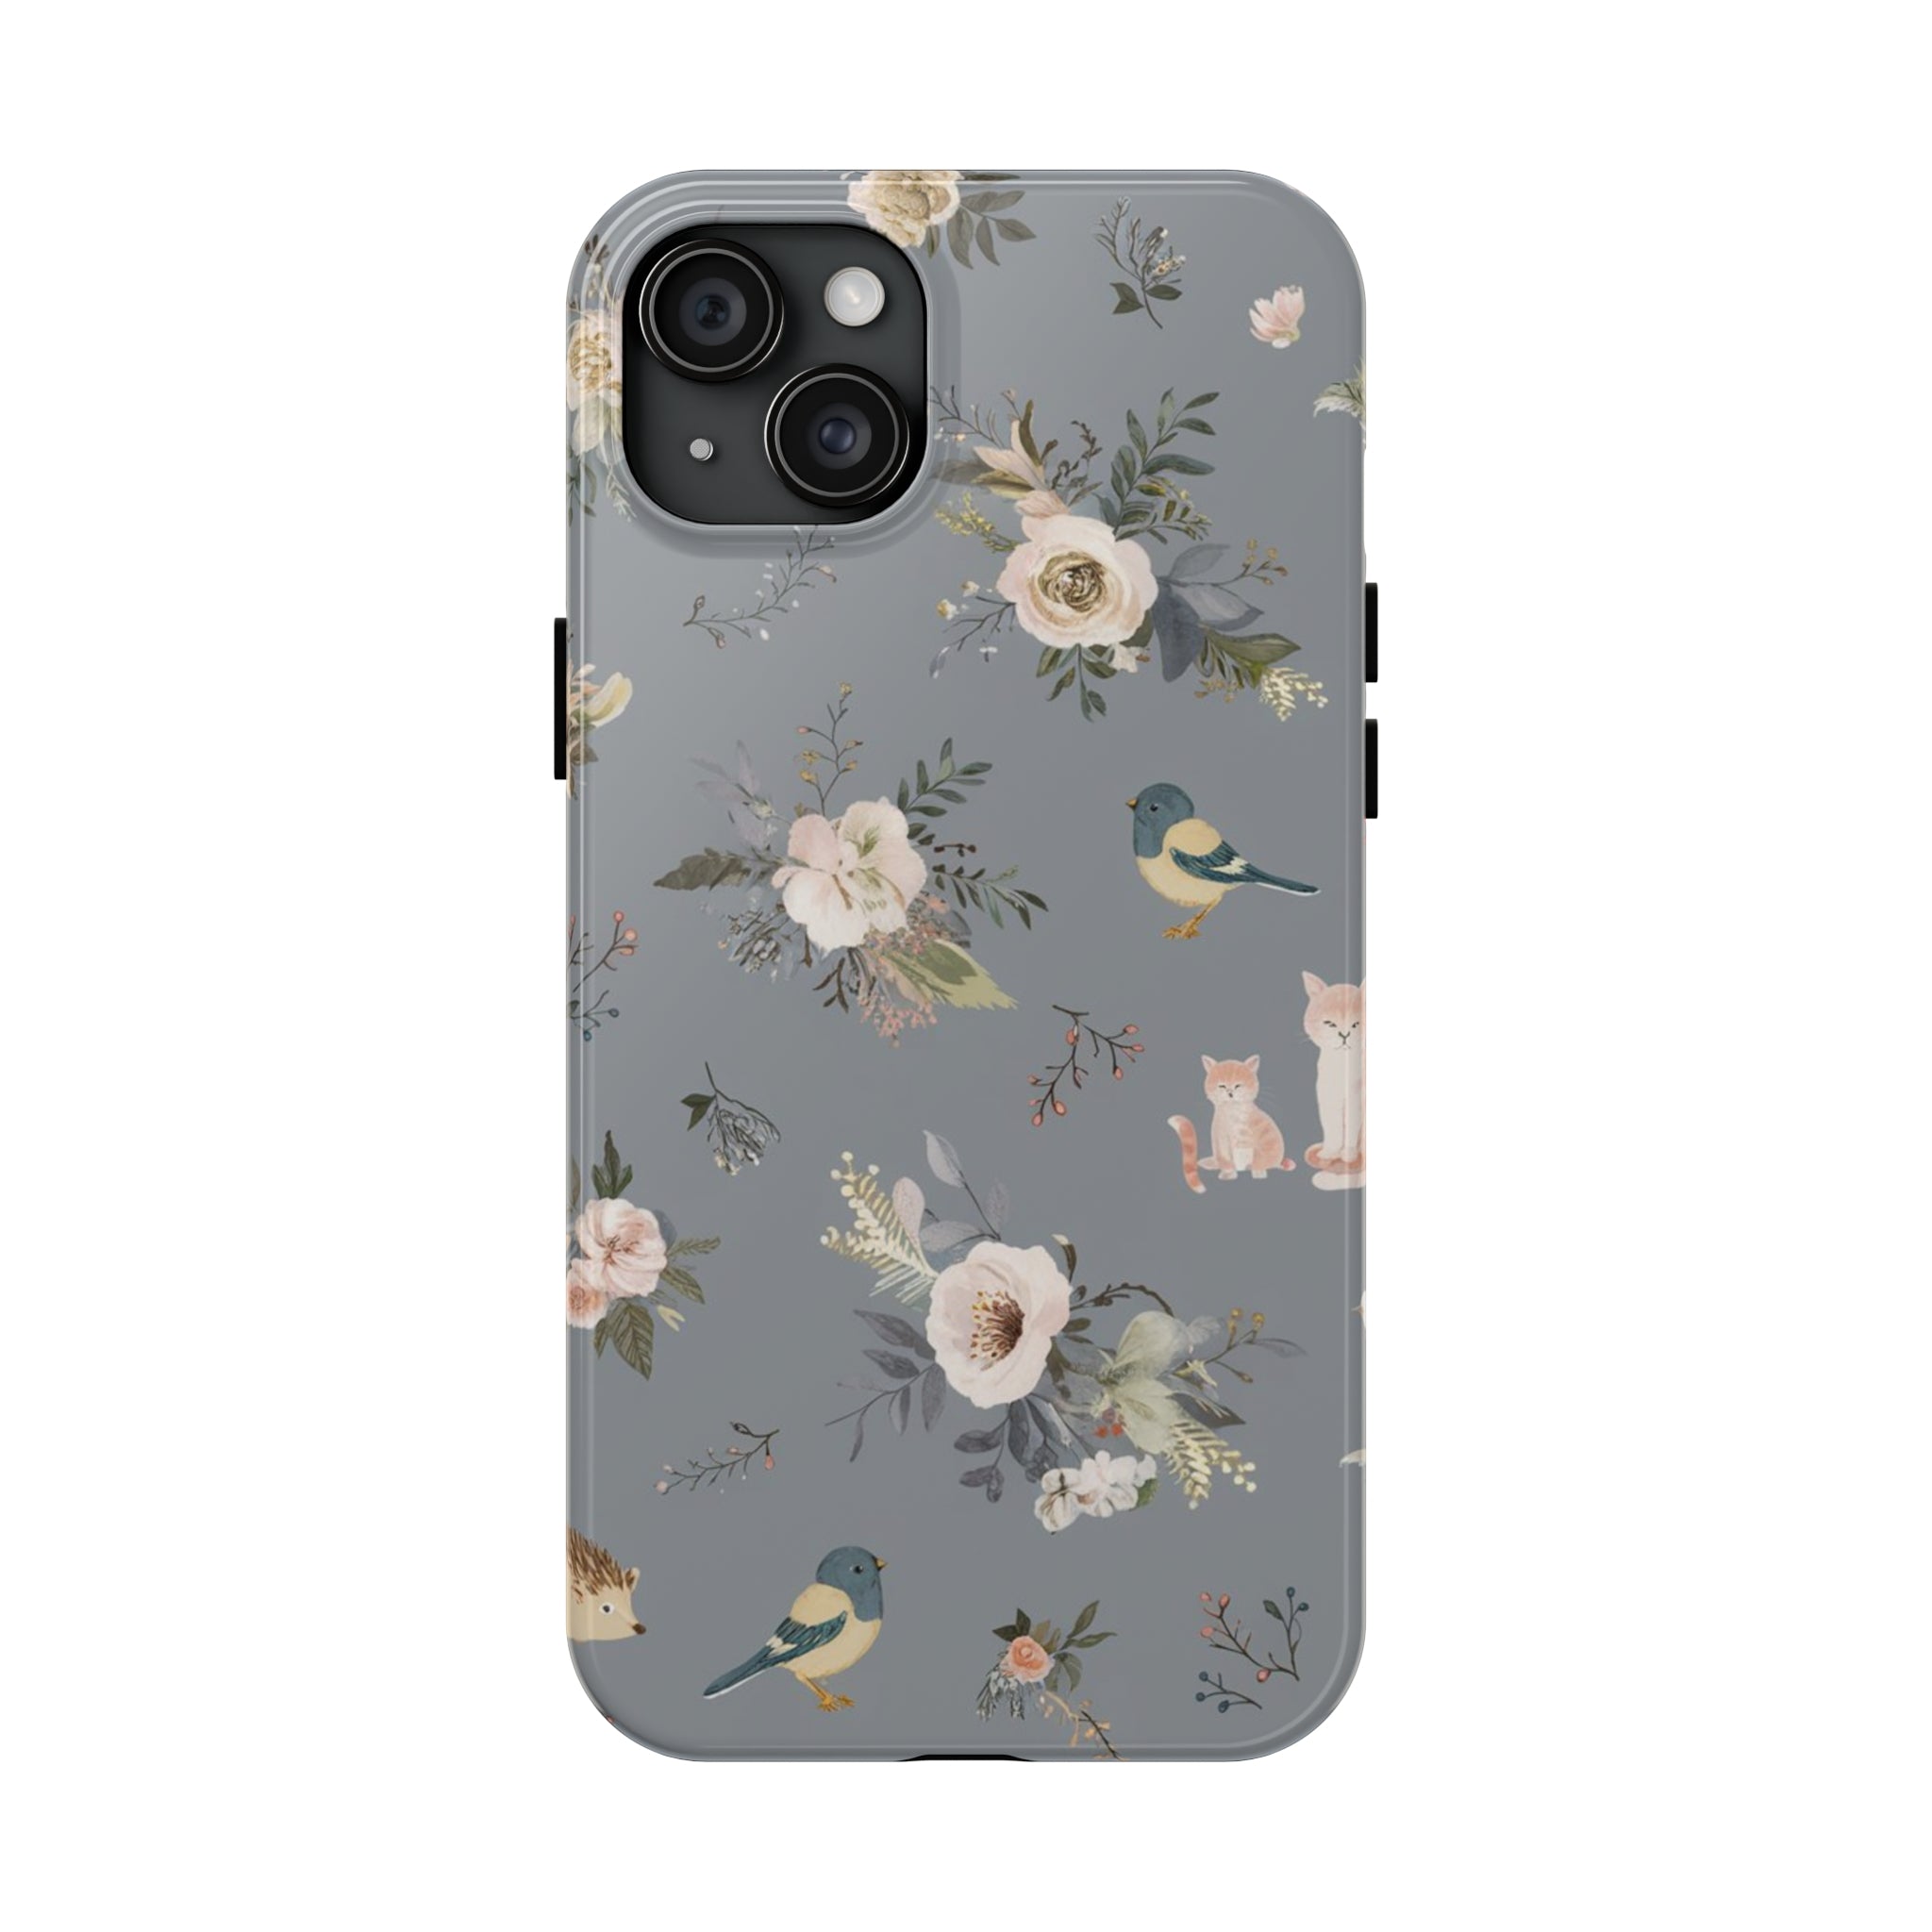 Cats and Birds - Tough Phone Cases